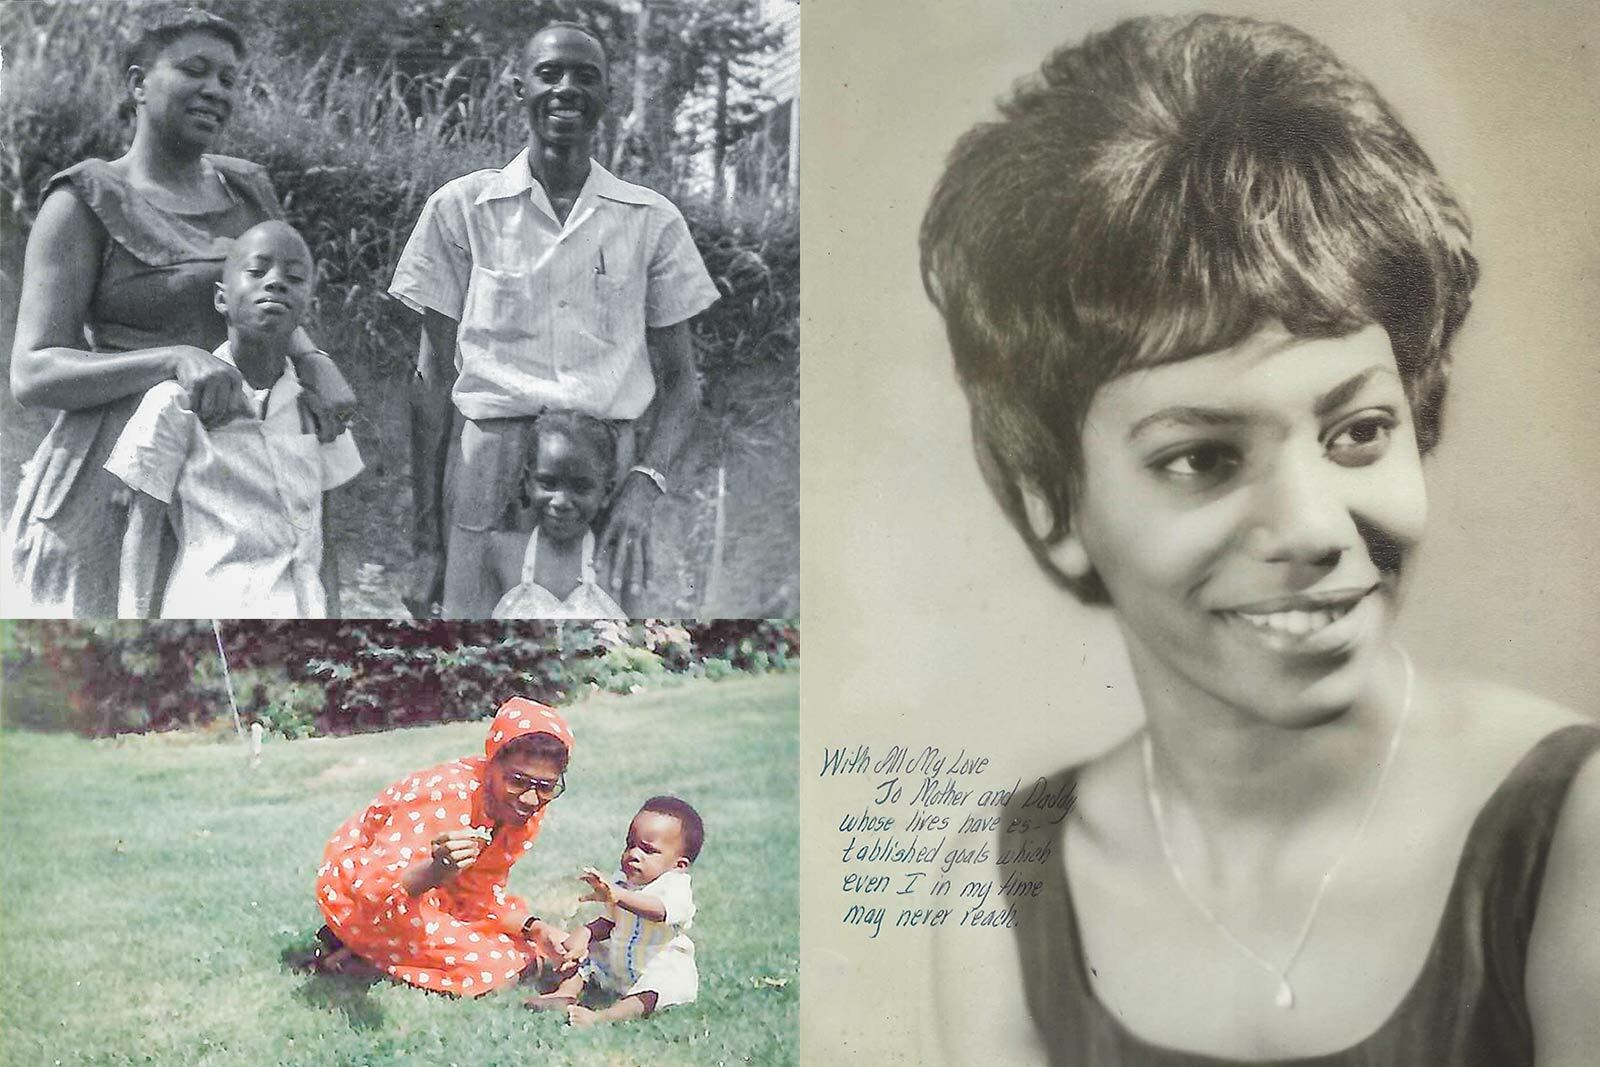 Photos of Judge McPherson as a child with her family, with her child, and a head shot as a young woman. there is a handwritten notw on the headdshot that says, "With all my love. To Mother and Daddy whose lives have established goals which even I in my time may never reach."